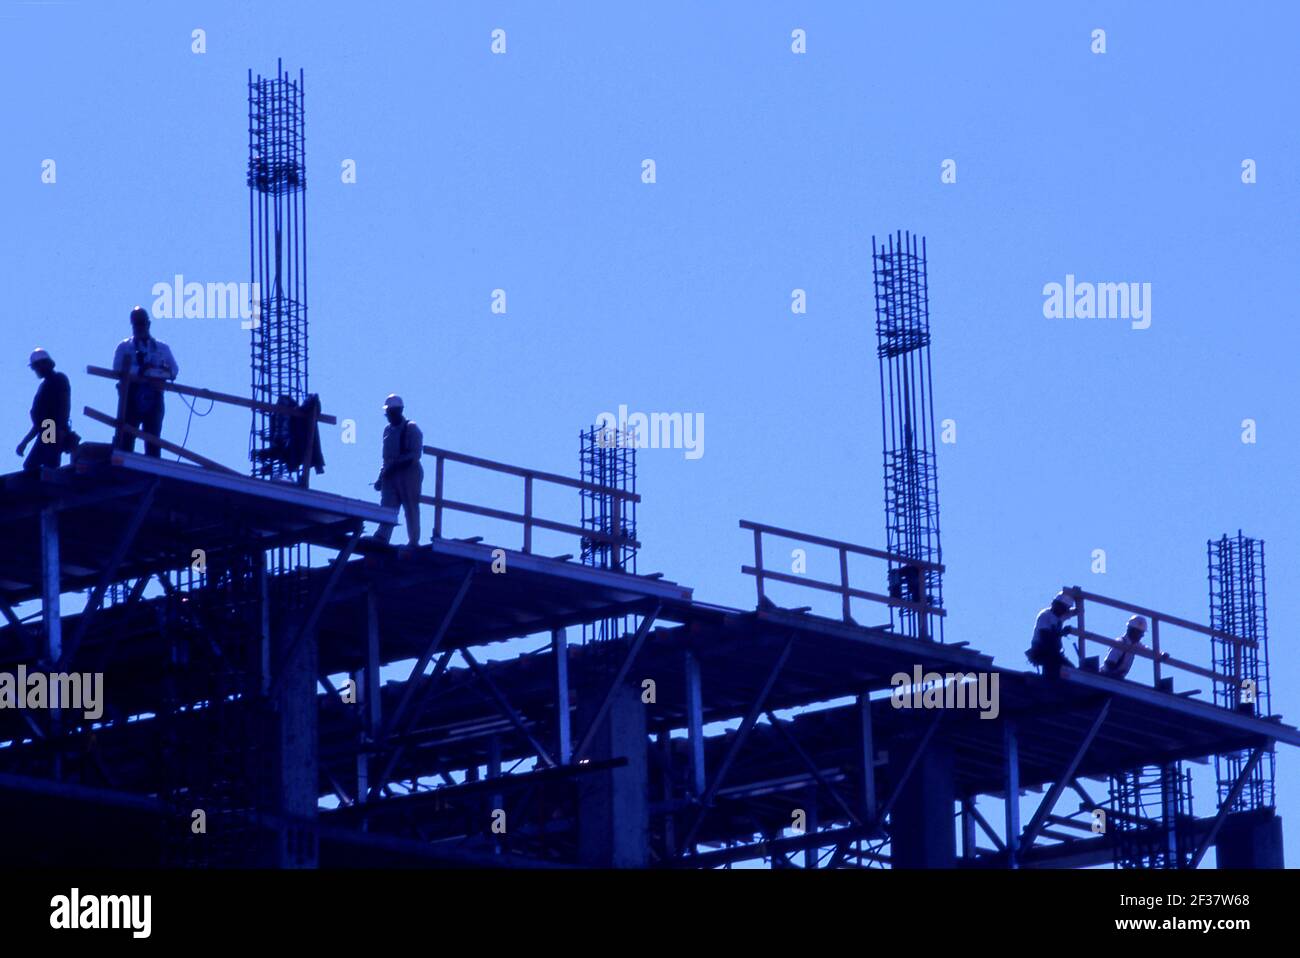 Construction workers on building site Stock Photo